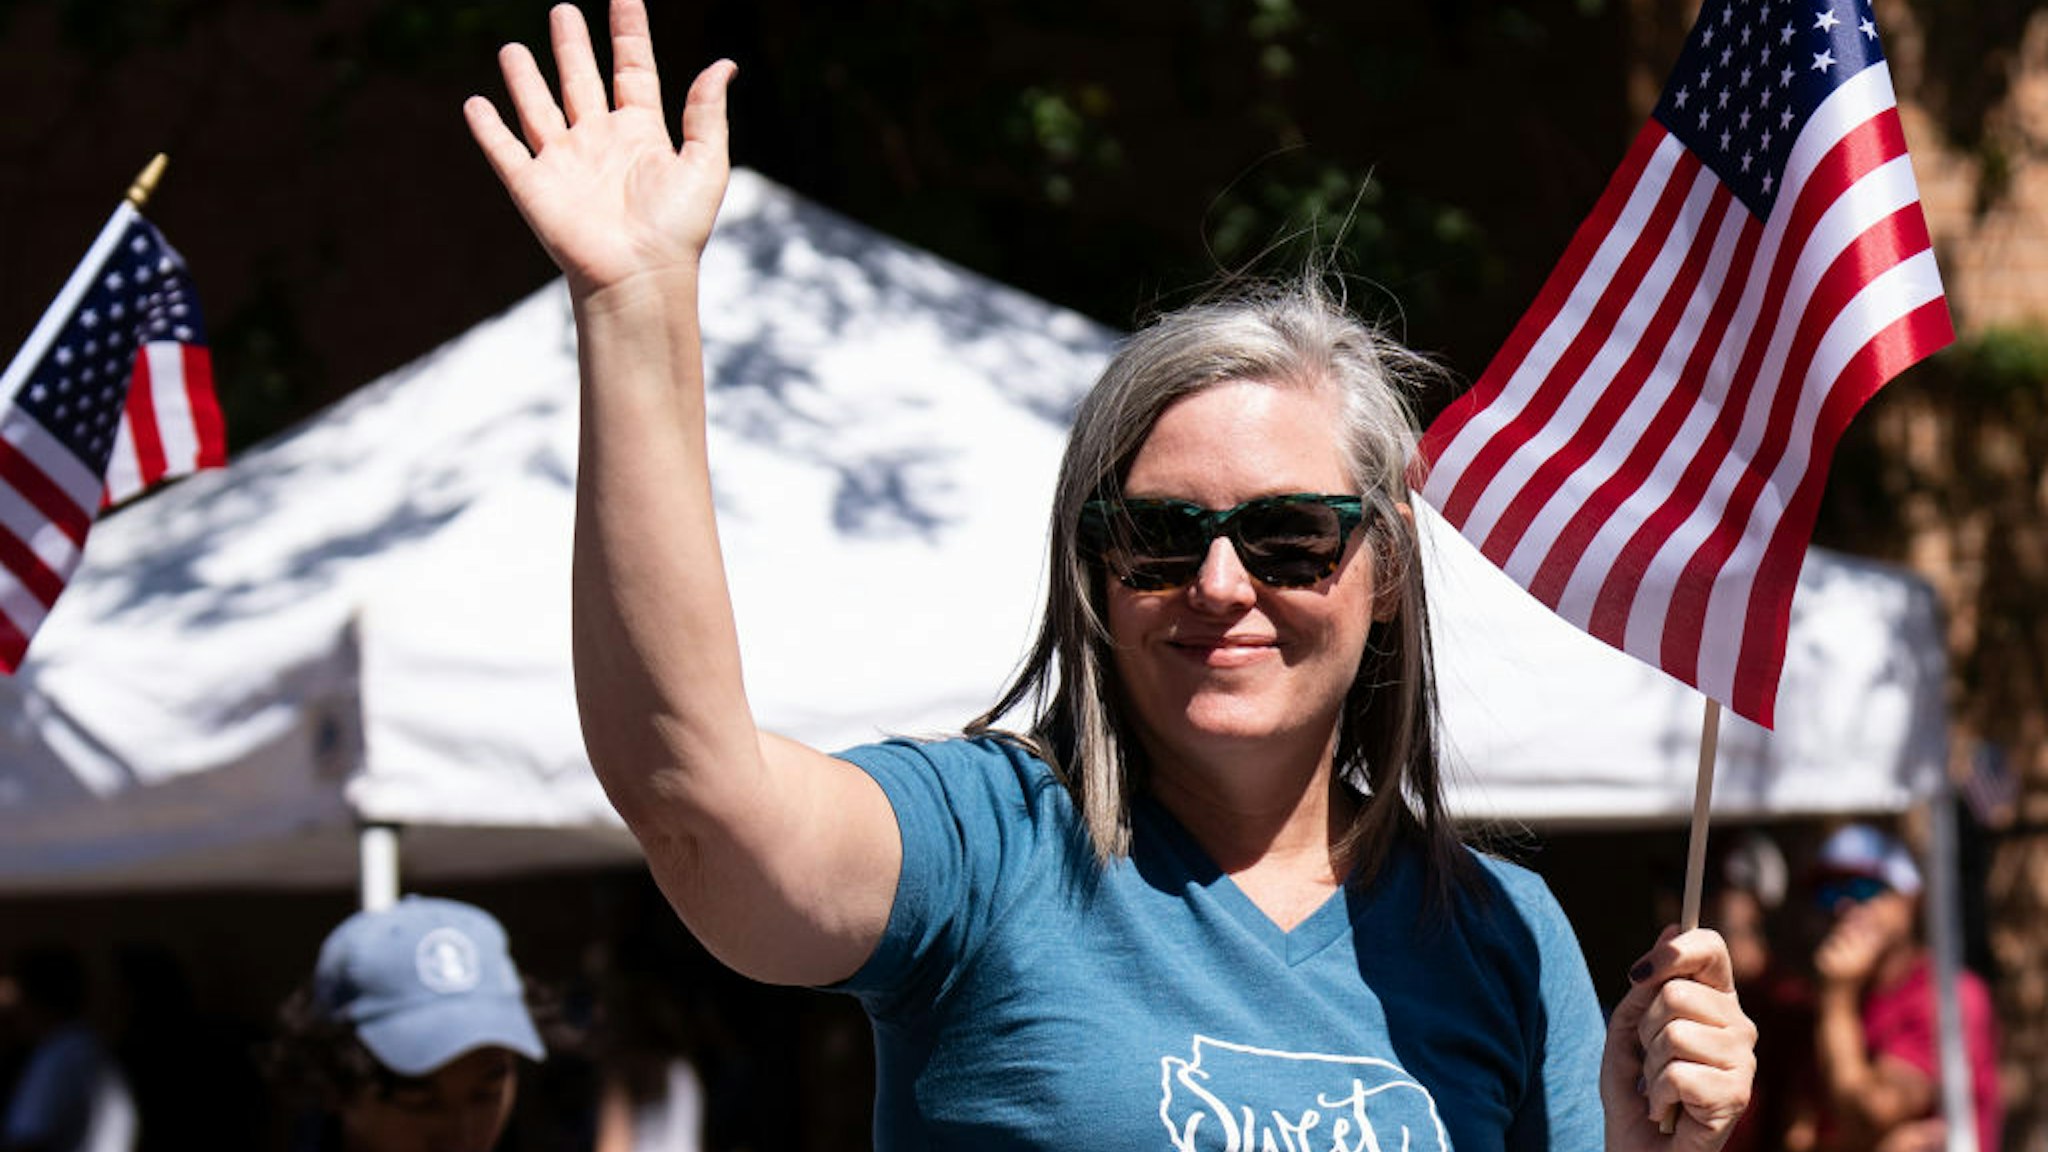 UNITED STATES - JULY 4: Katie Hobbs, Arizona Secretary of State and candidate for governor, waves during the Flagstaff Chamber of Commerce Fourth of July Parade in Flagstaff, Ariz., on Monday, July 4, 2022. (Bill Clark/CQ-Roll Call, Inc via Getty Images)